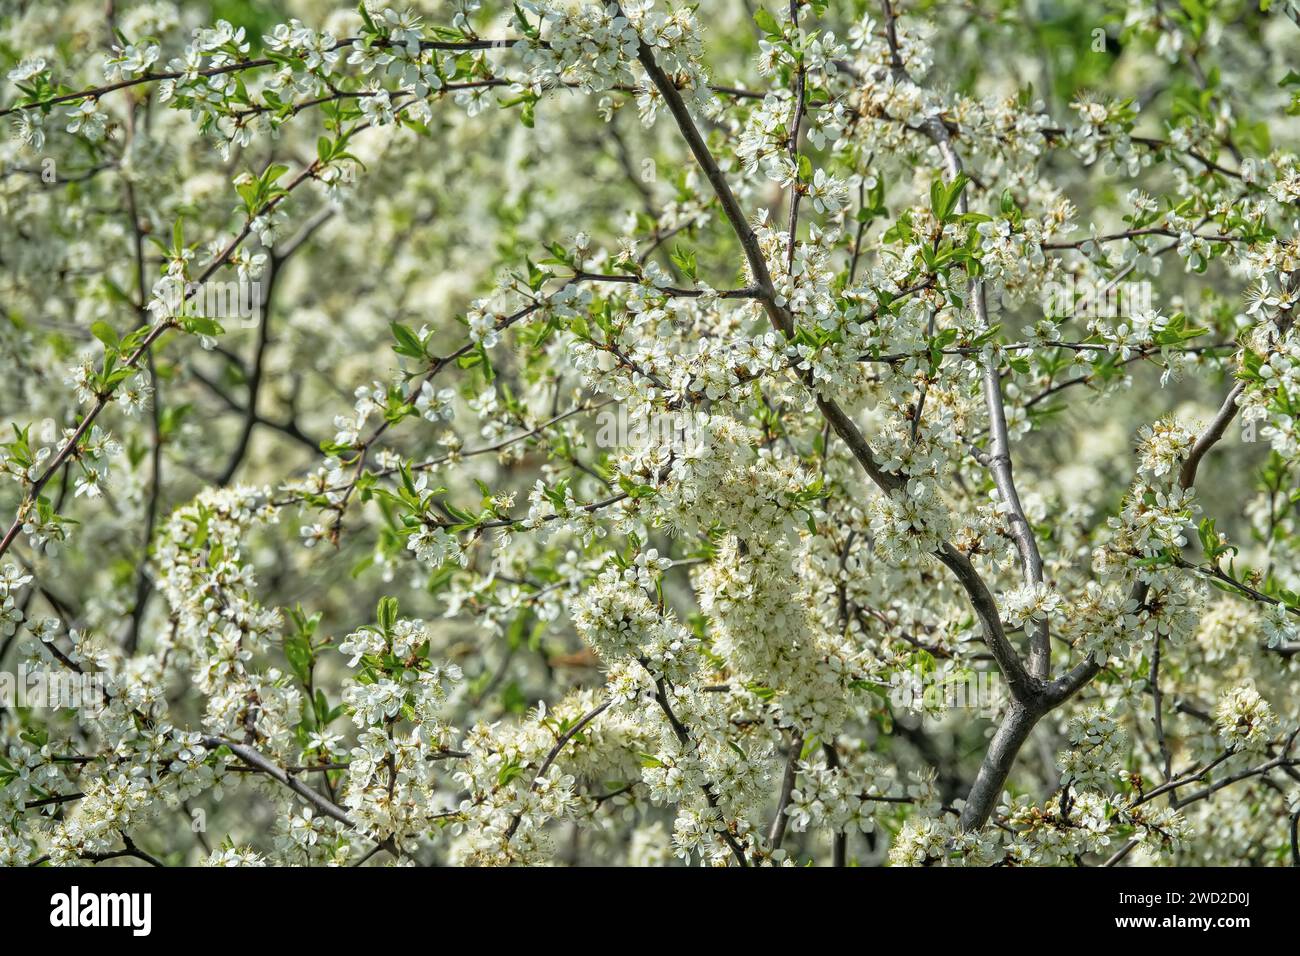 Blackthorn (Prunus spinosa) thornbush. Plot of forest-steppe, blooming wild fruit trees. Type of biocenosis close to natural, primal steppe. Rostov re Stock Photo